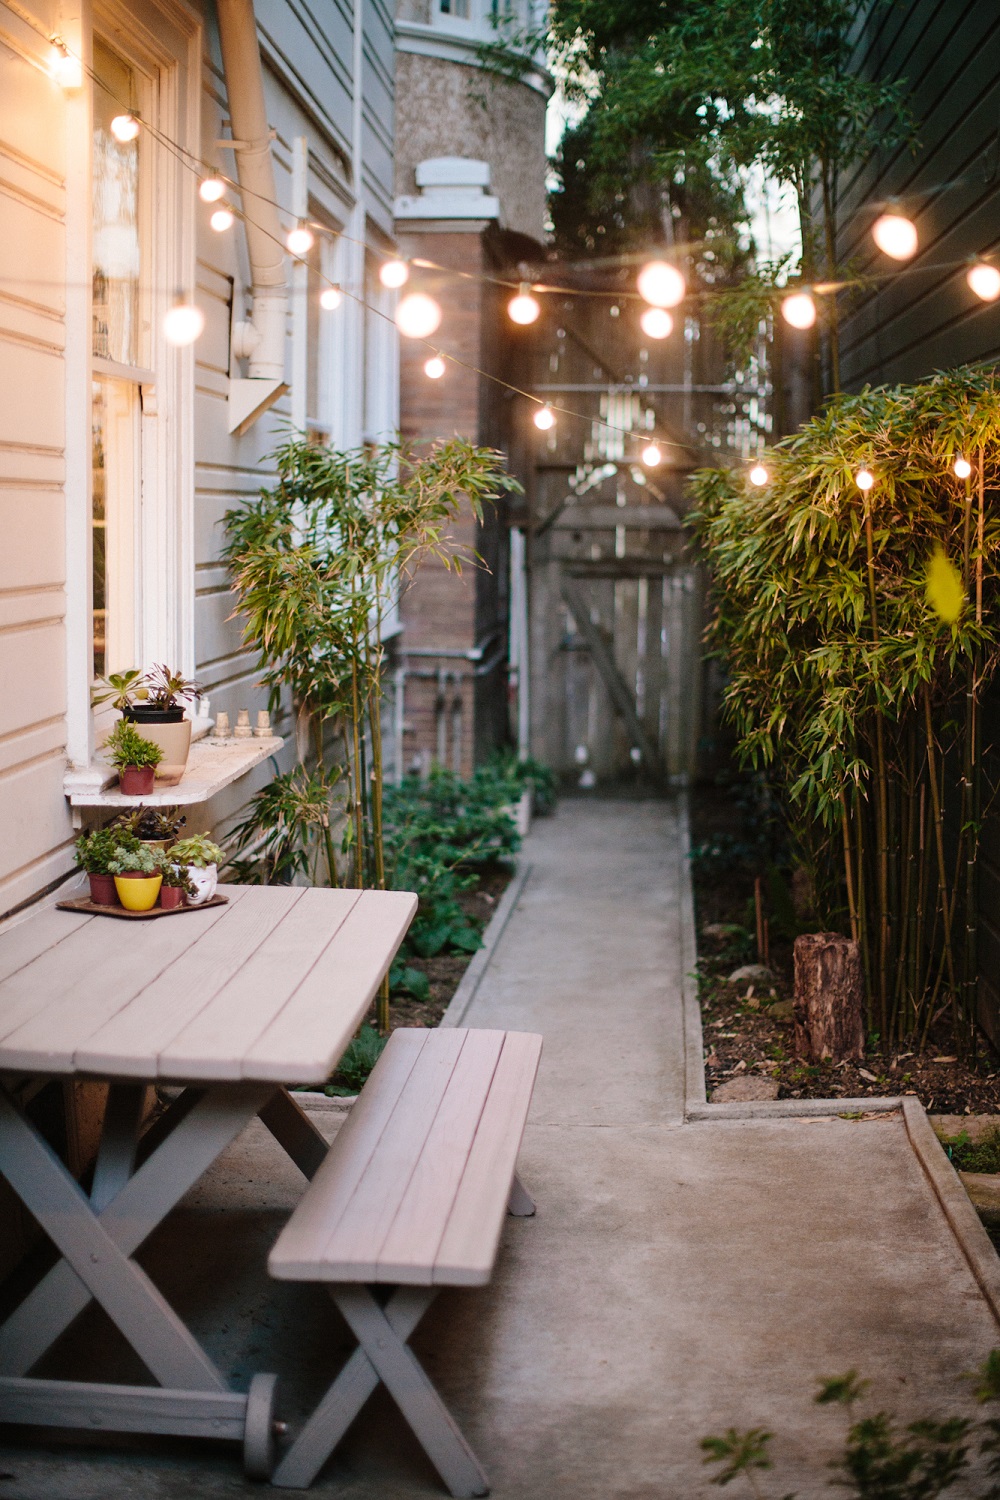 An Outdoor Lighting Decor Ready To Inspire You4